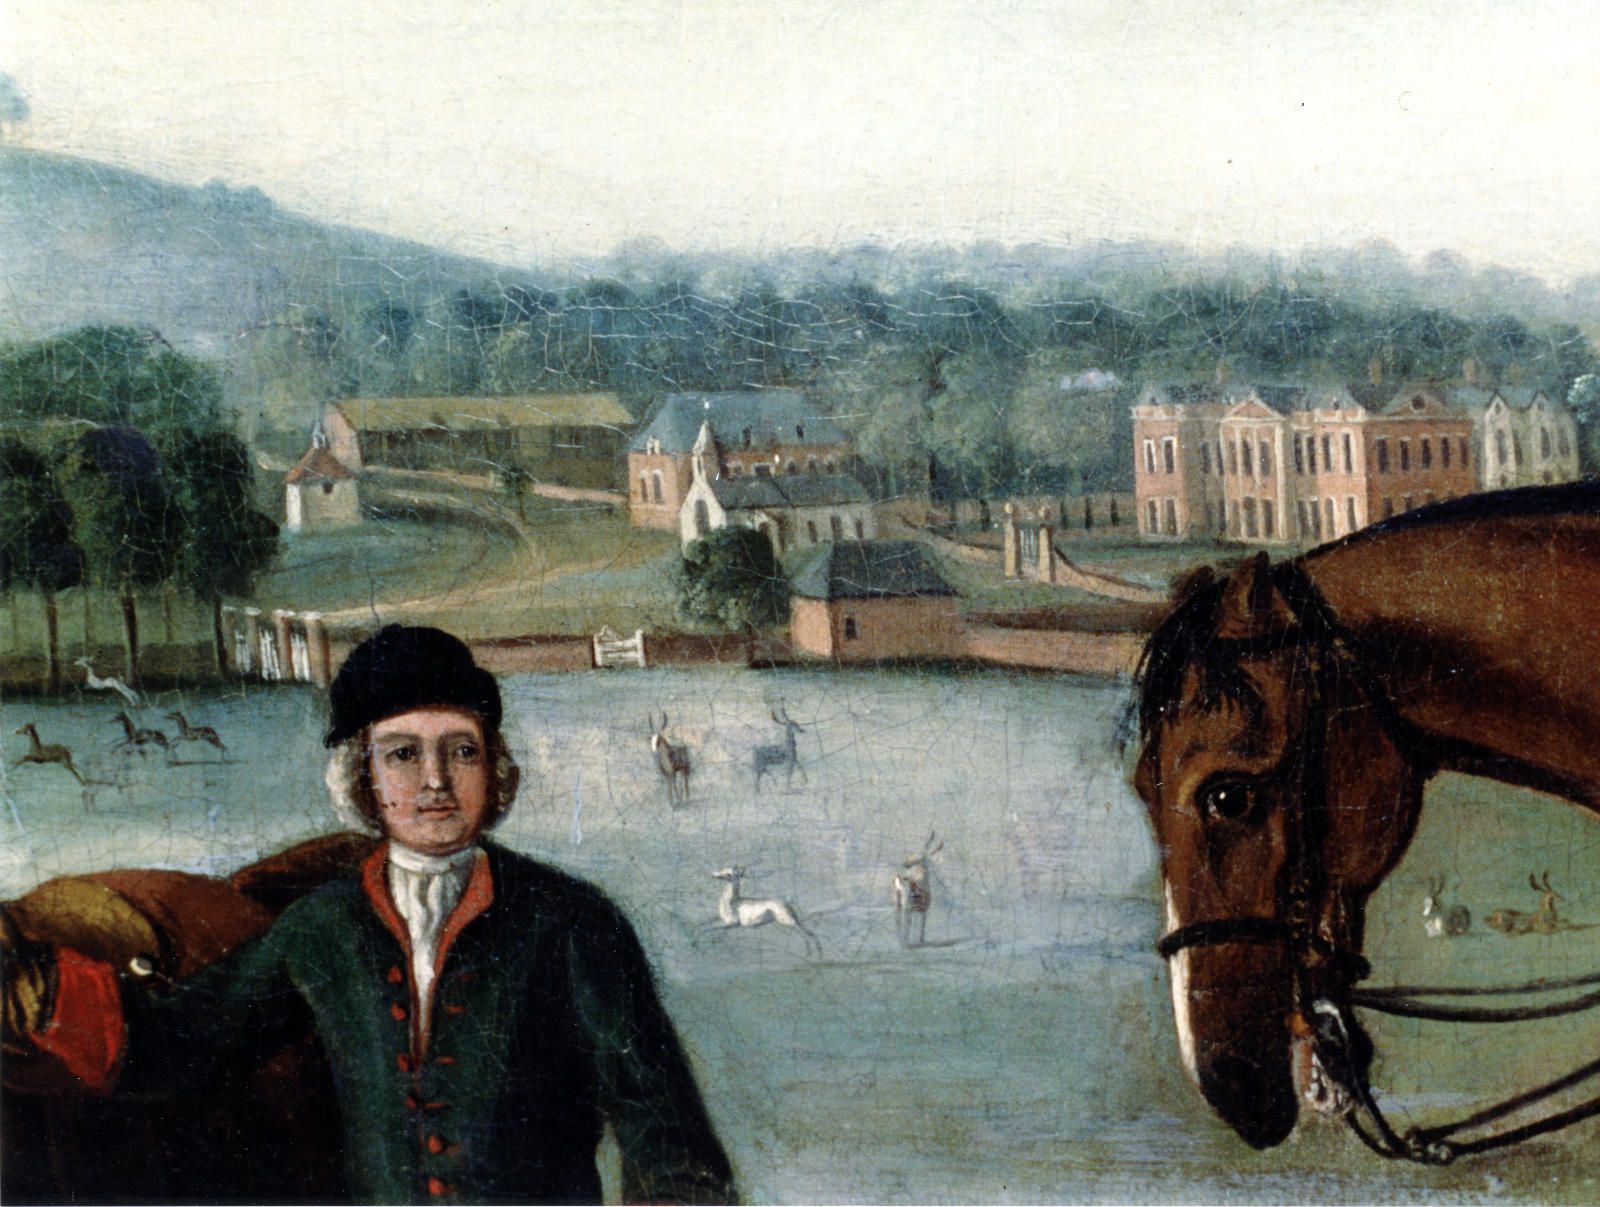 Fig. 1 - Detail from portrait of C. W. Bampfylde by J. Wootton c.1740 showing the Hestercombe House chapel background centre